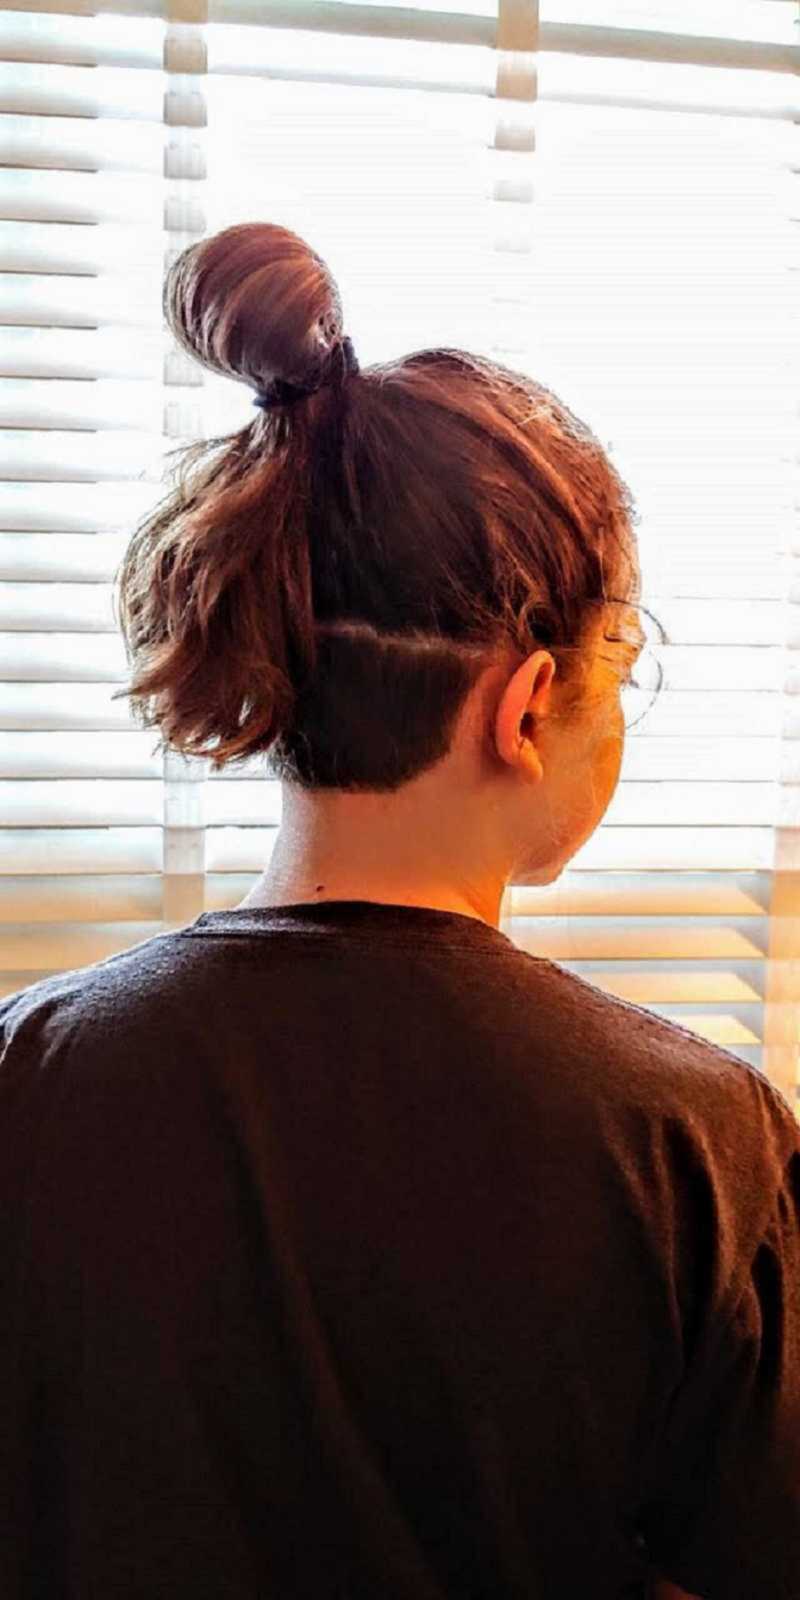 boy with long hair in a bun faces window with closed blinds